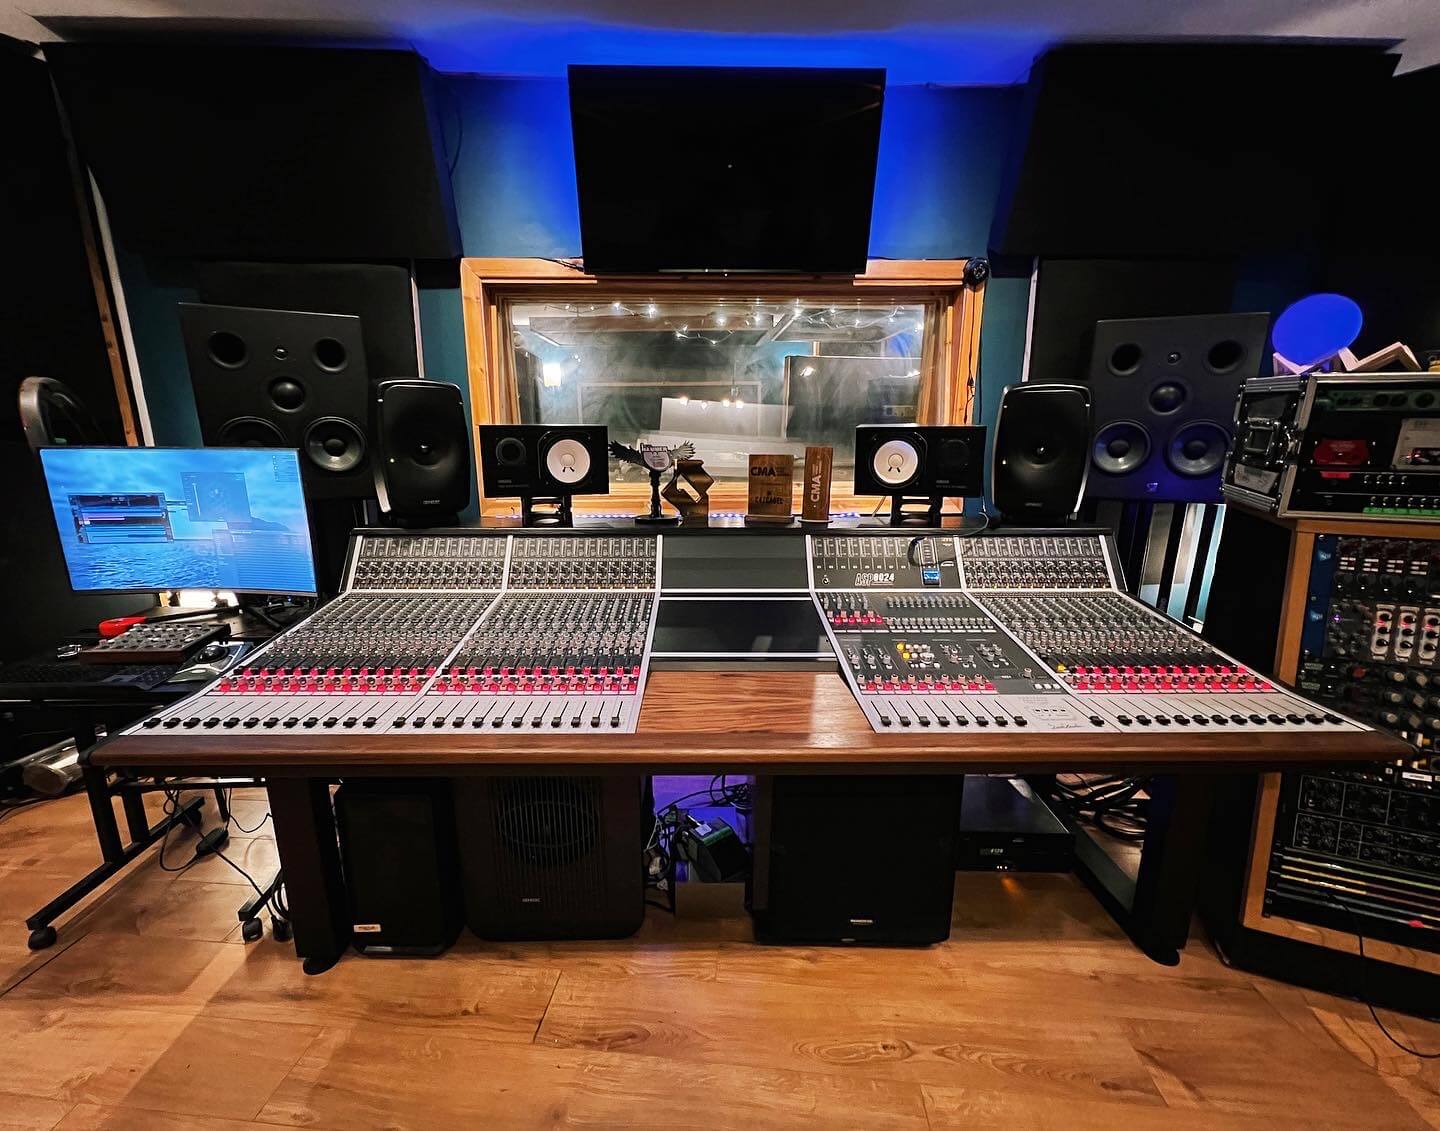 Disco at forstå bekymring Renowned Producer Upgrades With 'Stunning' New Audient Desk - Audient